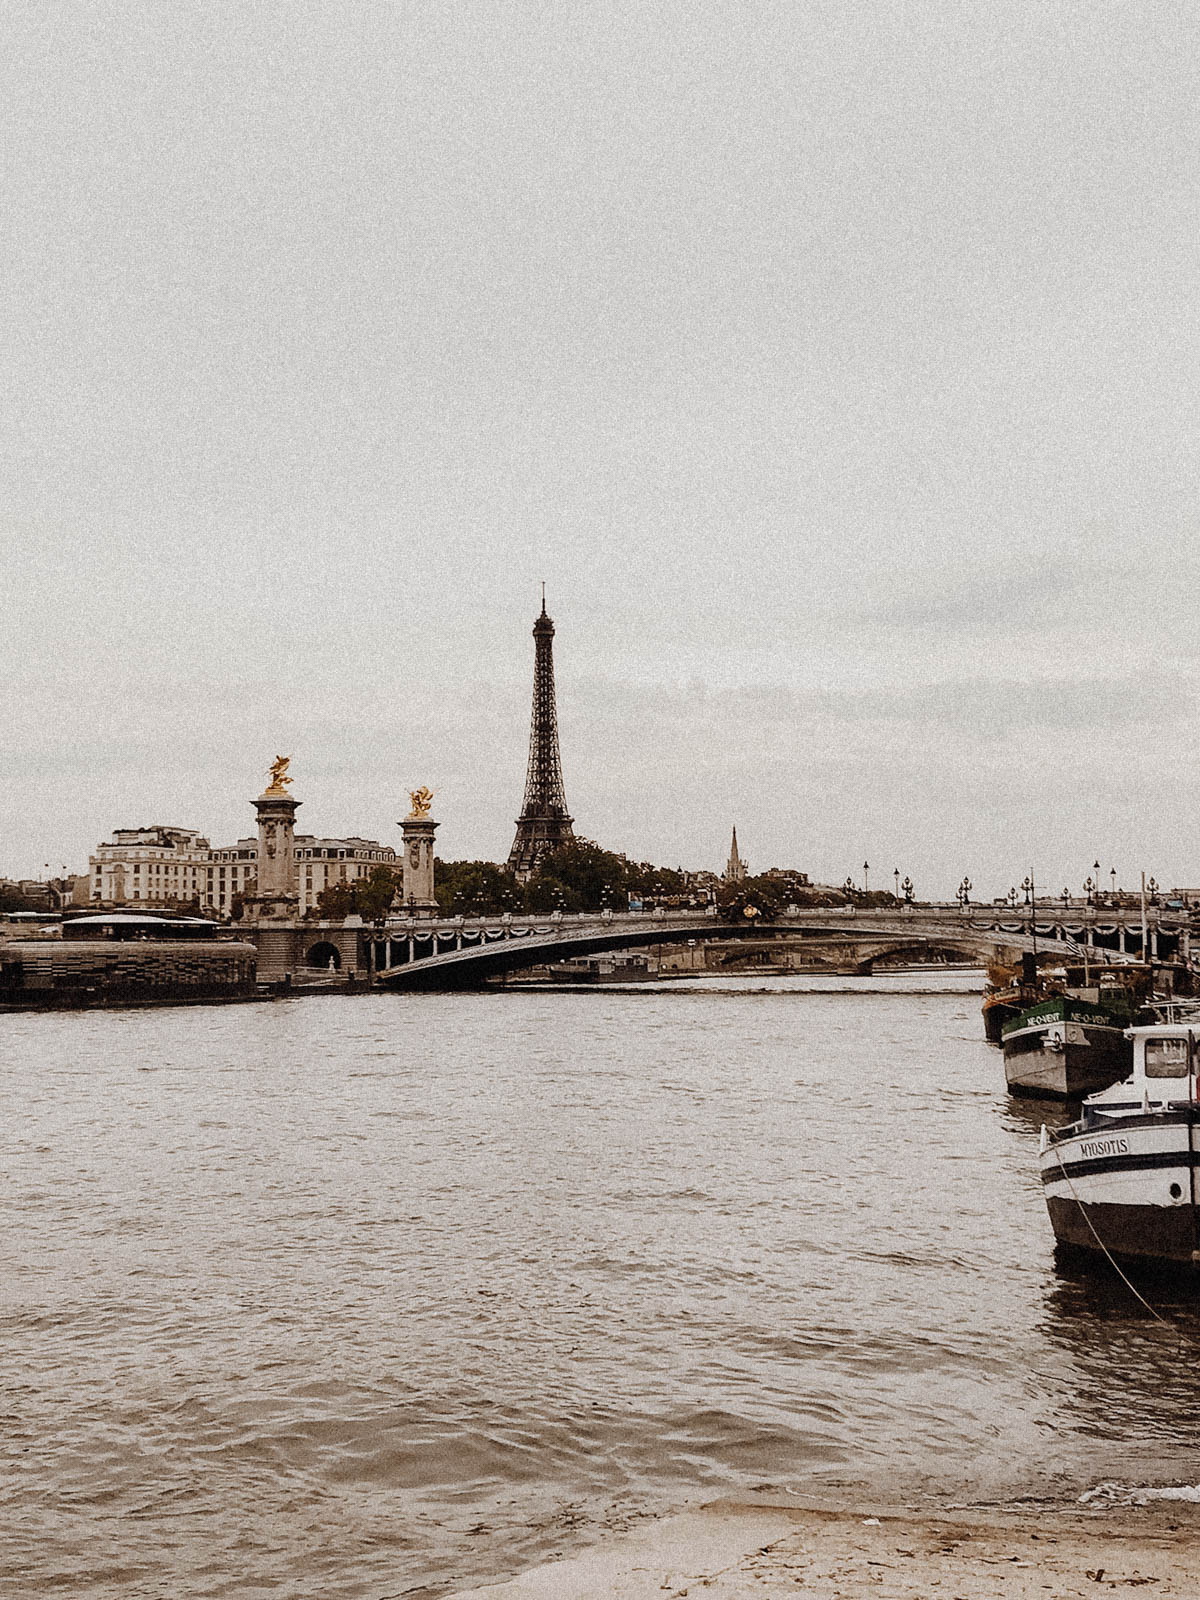 Paris France Travel Guide - River, Eiffel Tower, and Pont Alexandre III, European Architecture and Buildings / RG Daily Blog